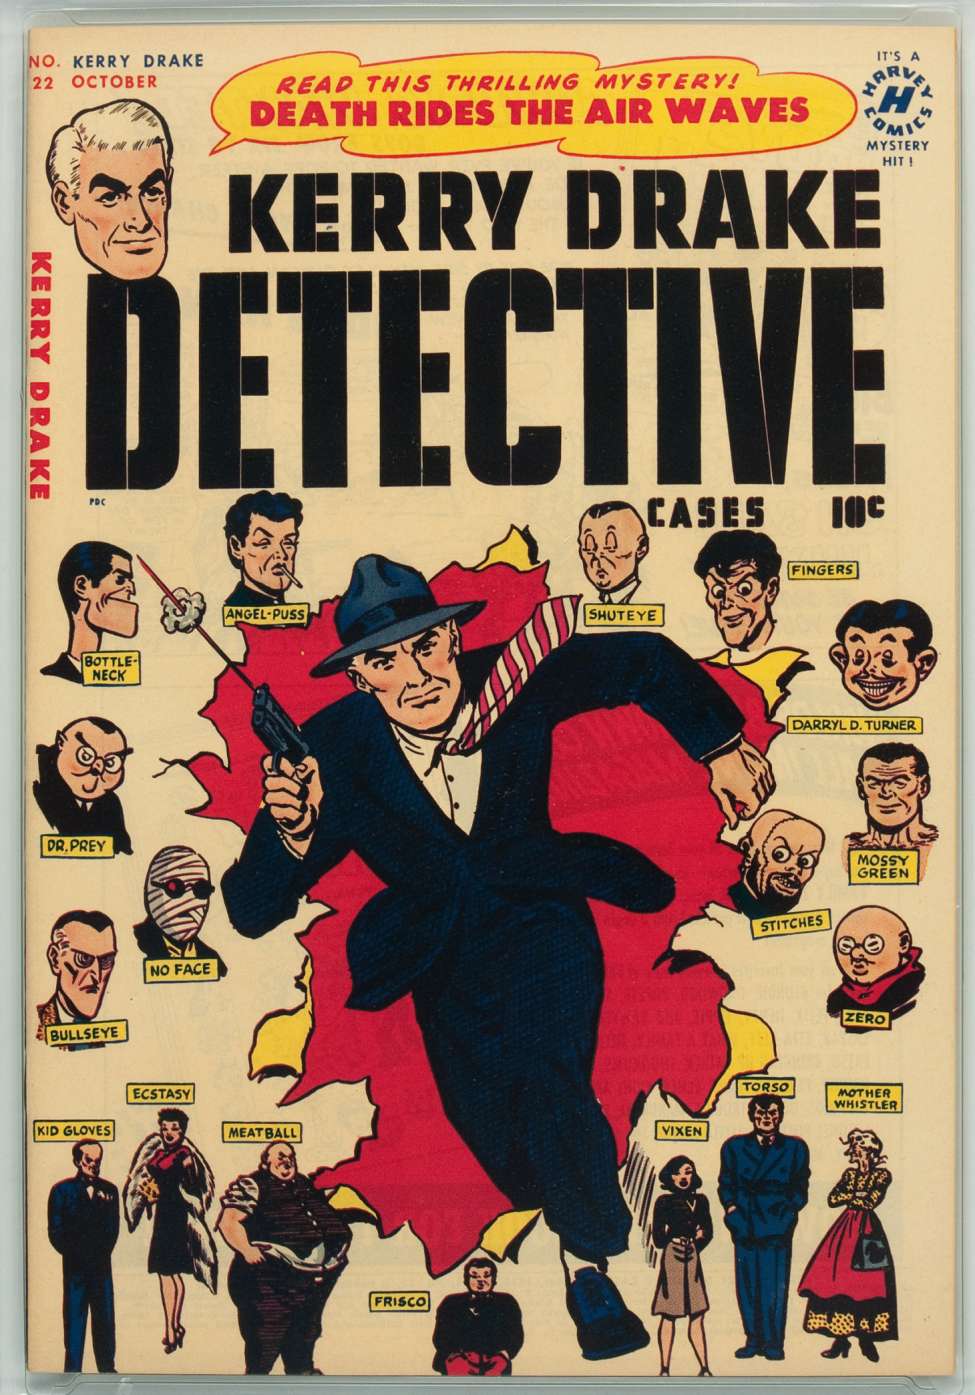 Book Cover For Kerry Drake Detective Cases 22